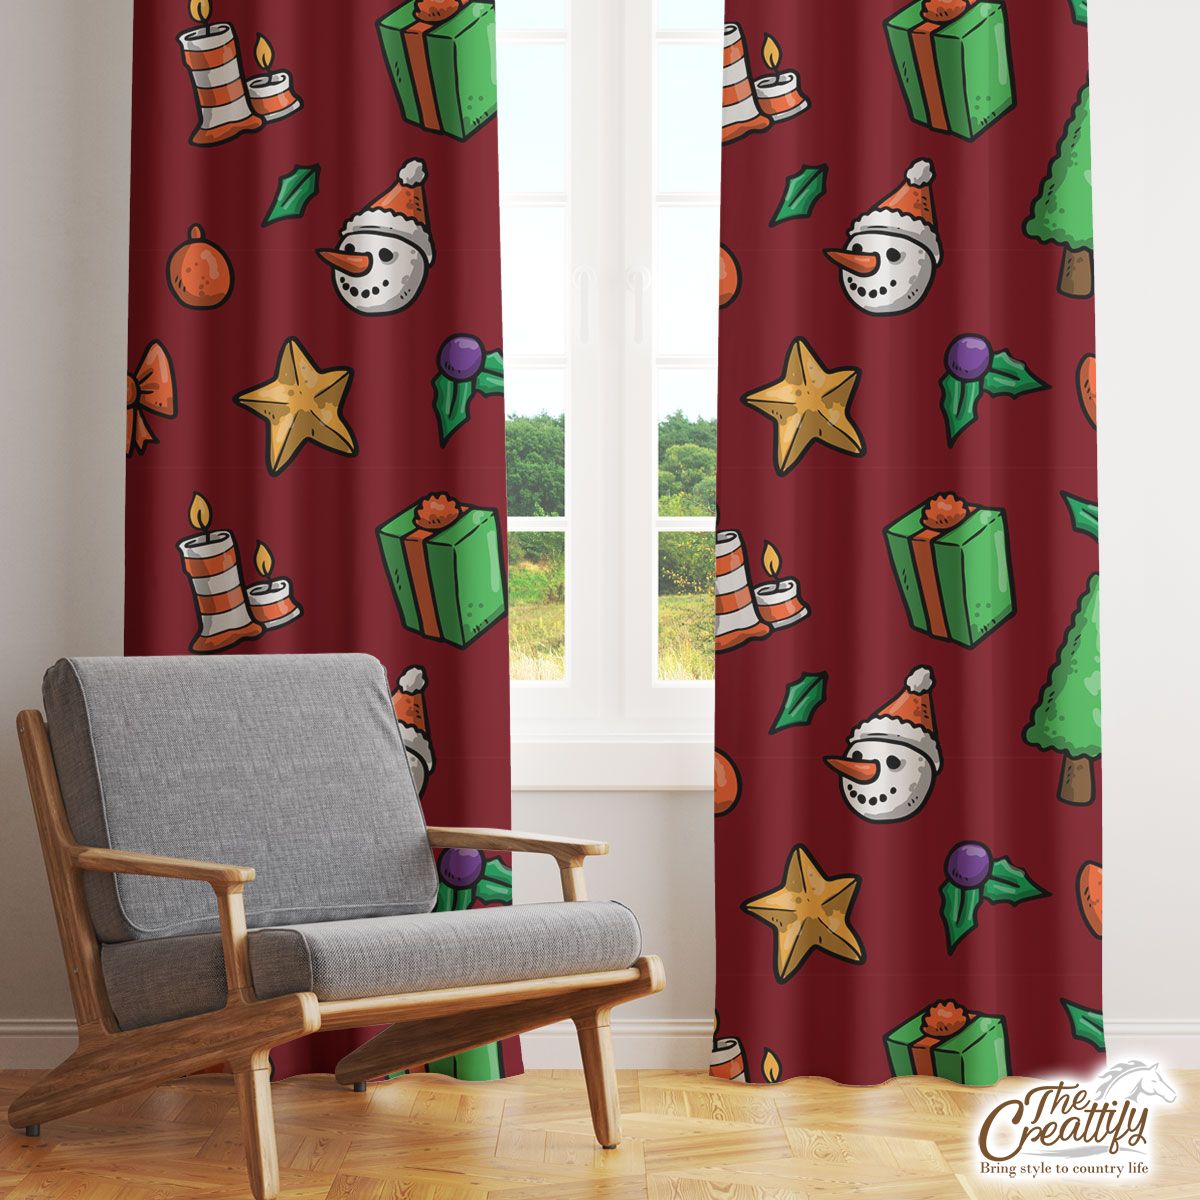 Christmas Gifts, Candles, Pine Tree And Snowman FaceWith Santa Hat Red Pattern Window Curtain